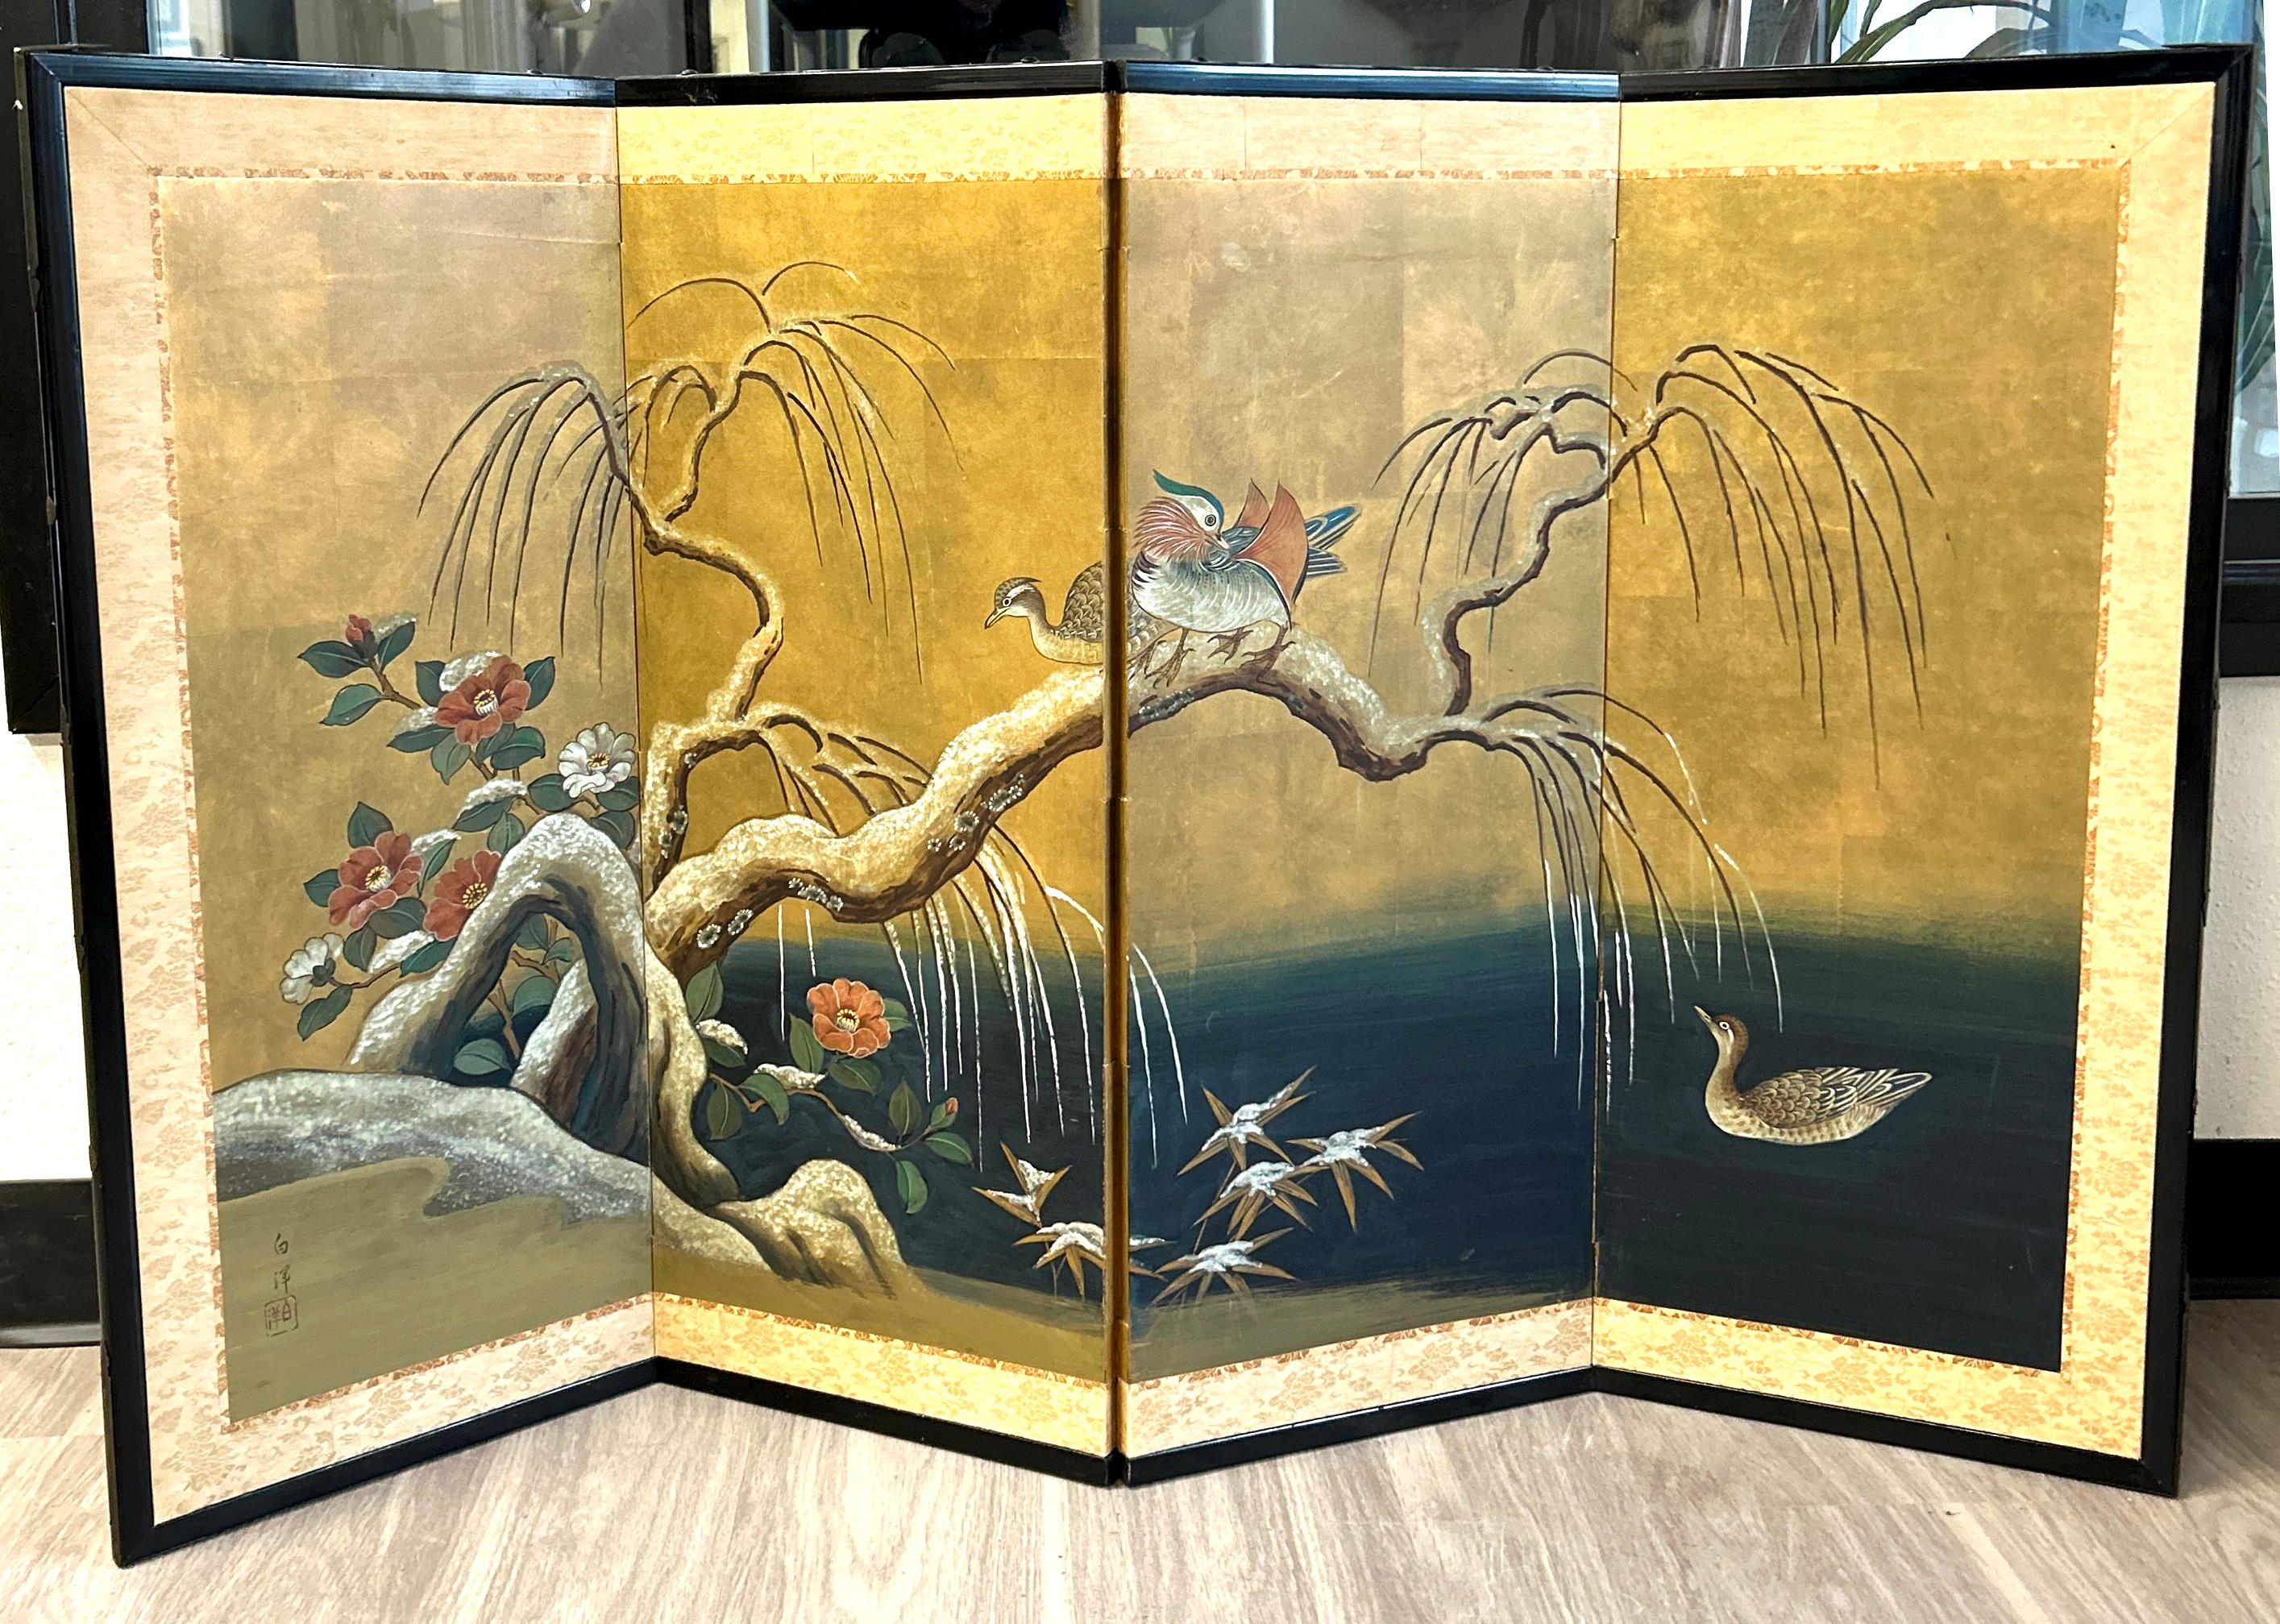 Antique Japanese Four Panel Byobu Screen: Mandarin Ducks by Snowy Pond in Early Spring.
Kano School painting of a weeping willow tree with branches over a stunning indigo blue pond. Some early spring flowers by pond's edge. Mineral pigments on gold